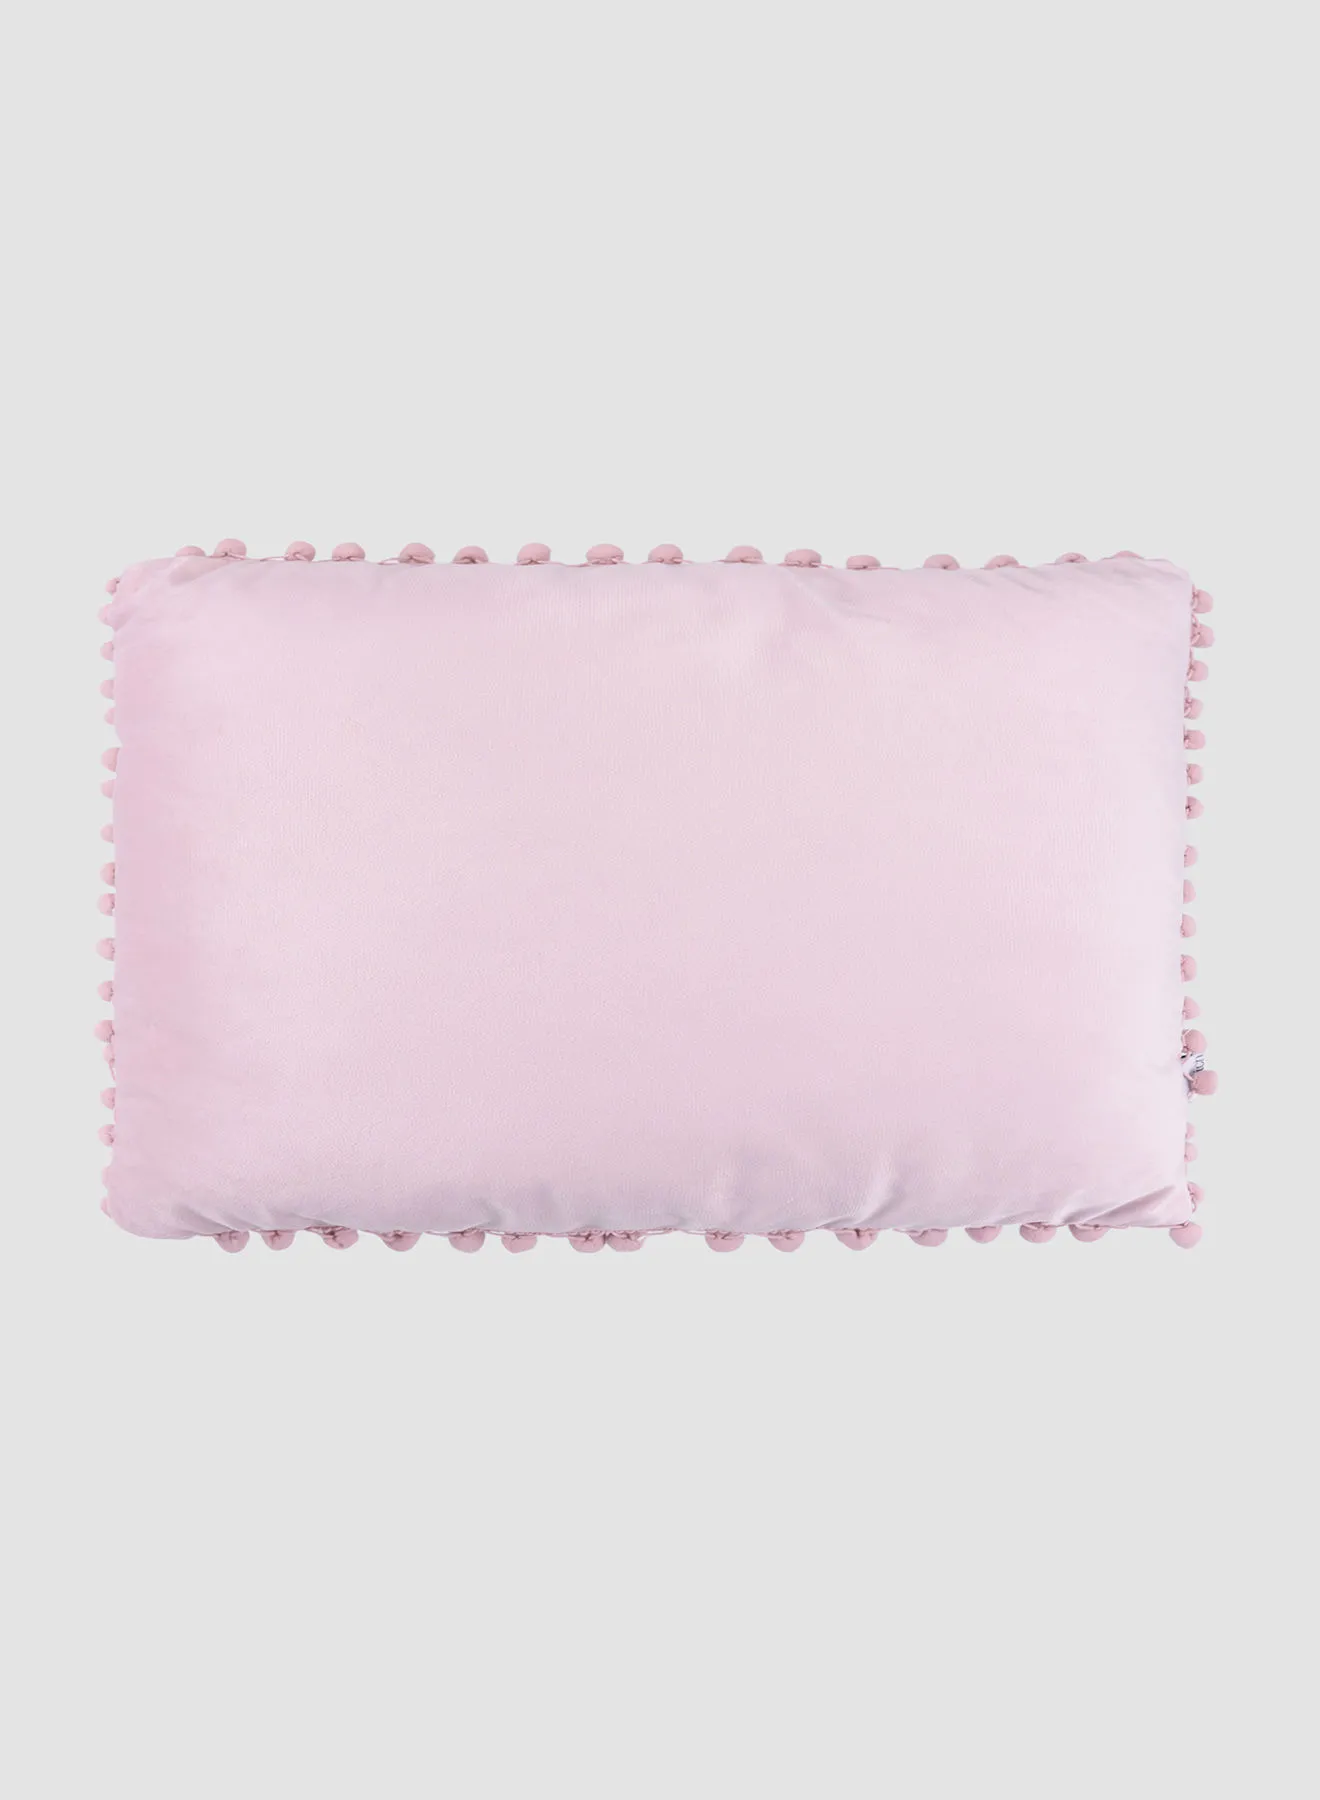 Switch Velvet Cushion  with Pom-poms, Unique Luxury Quality Decor Items for the Perfect Stylish Home Pink 30 x 50cm